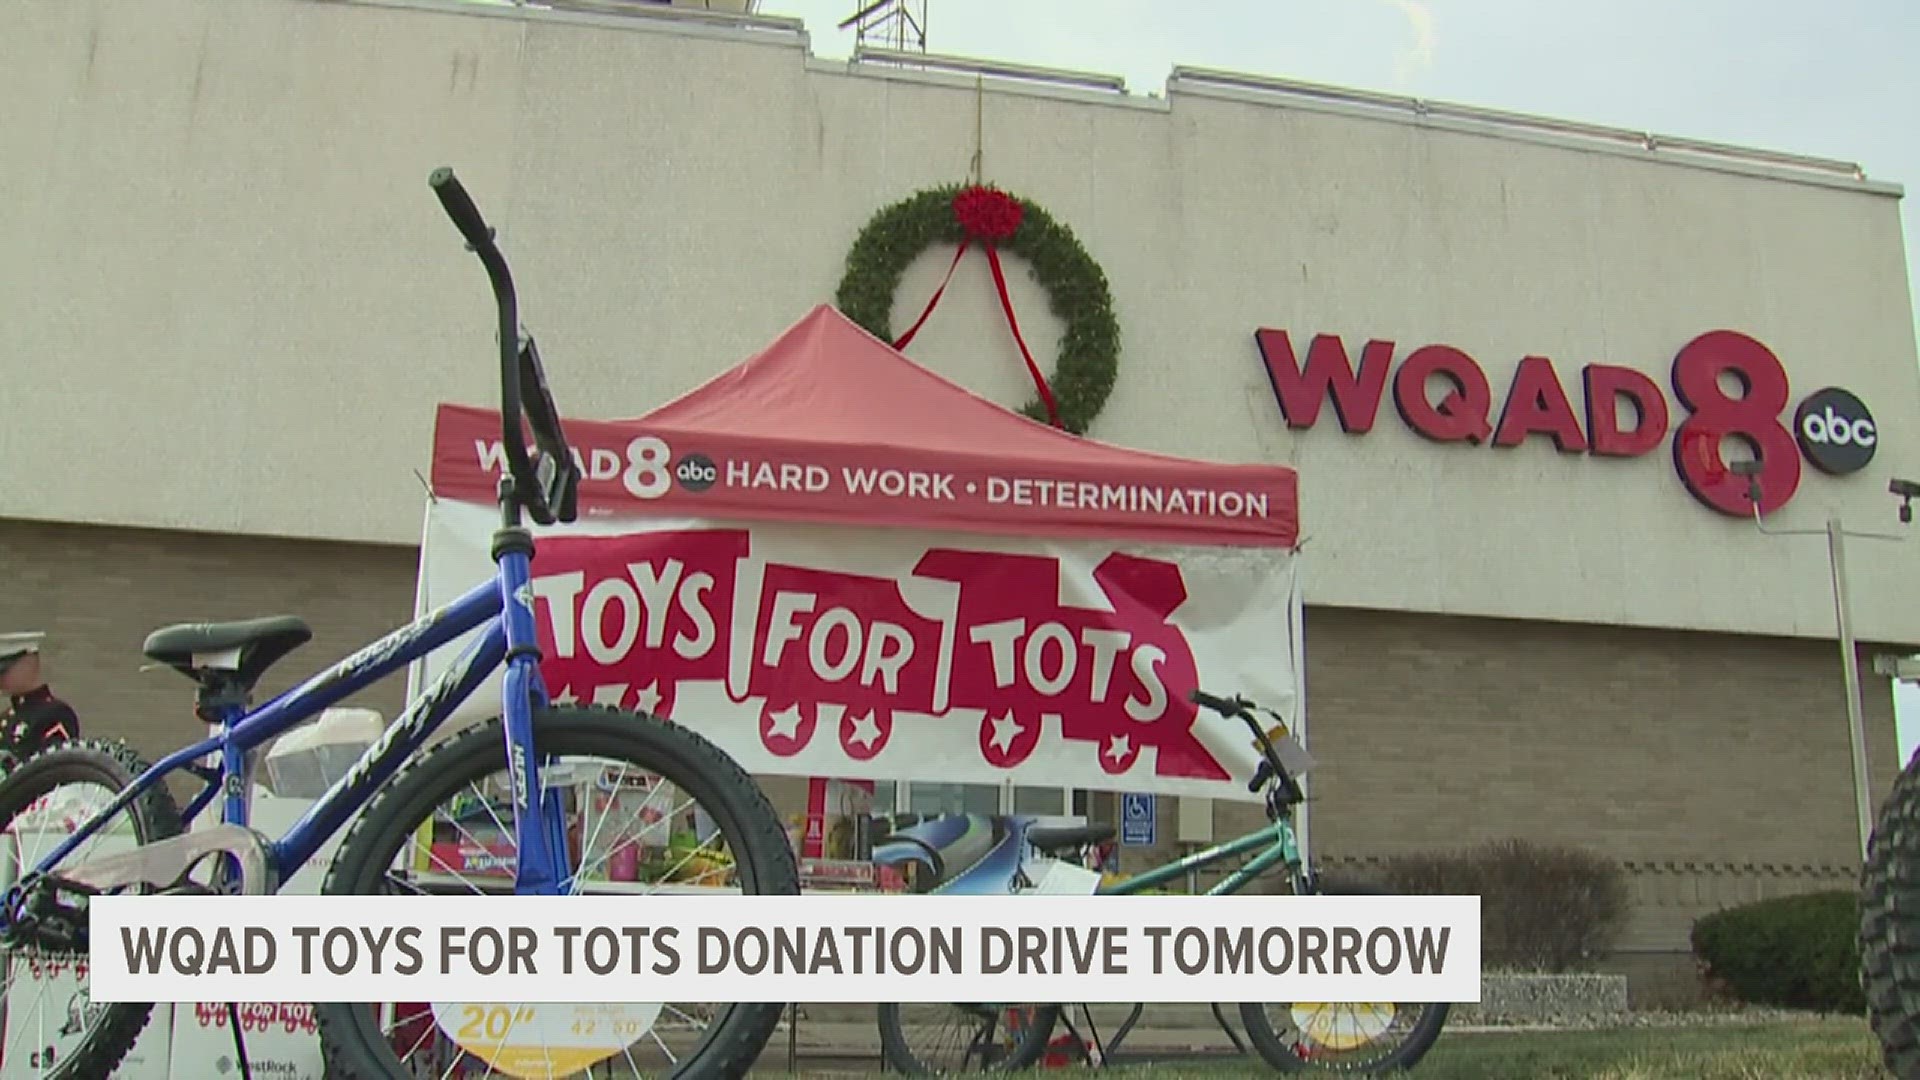 WQAD is proud to once again partner with WLLR and Toys For Tots to host a donation drive on Tuesday, Nov. 28. Drop off your toys at our station from 5 a.m. to 7 p.m.